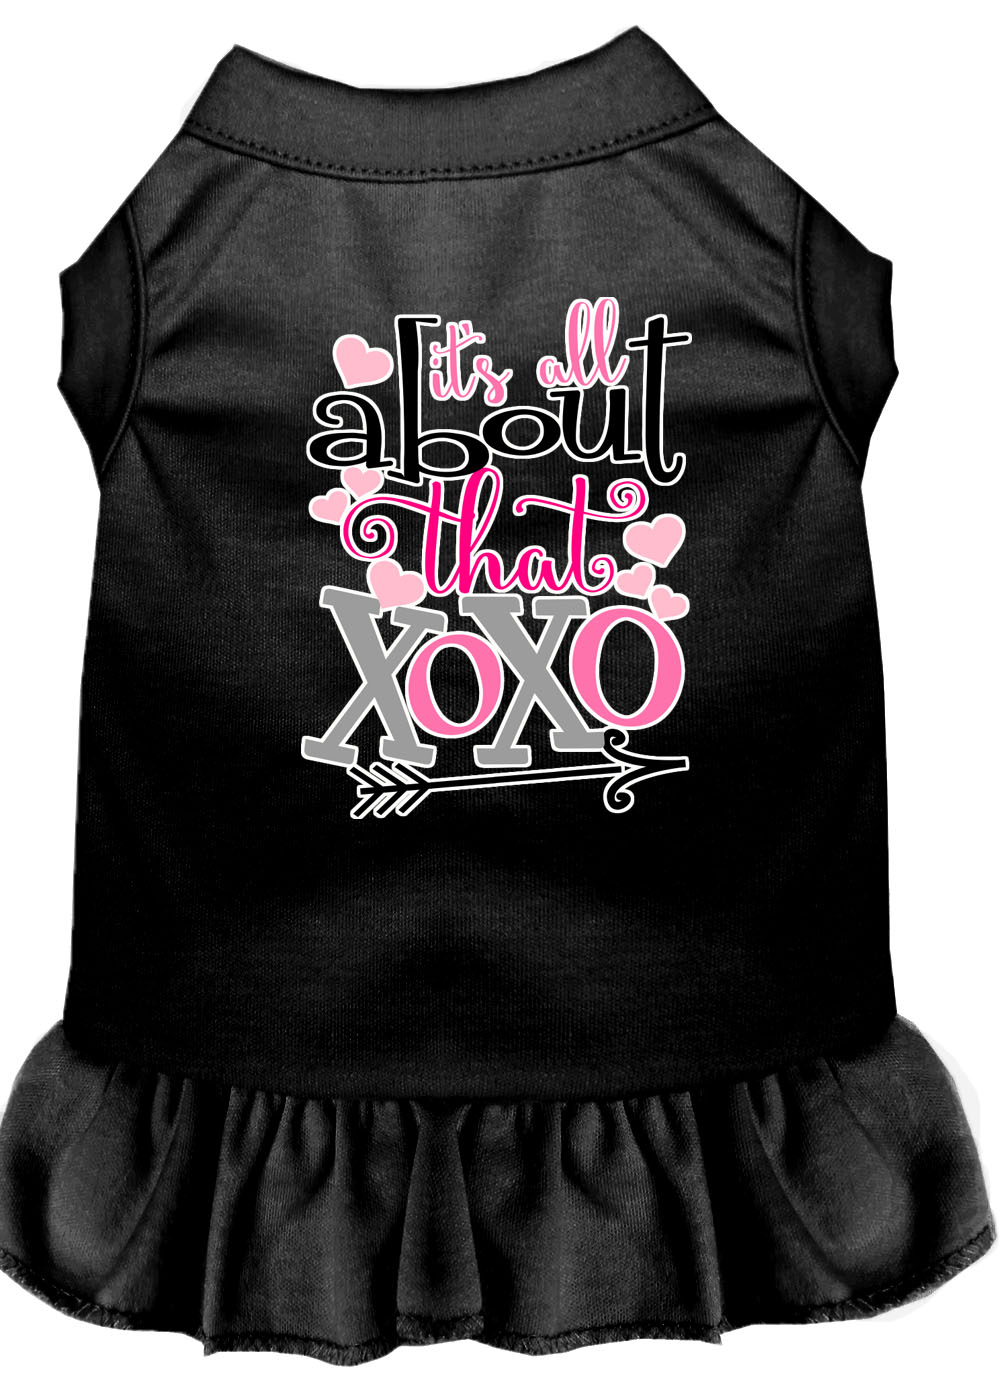 All about the XOXO Screen Print Dog Dress Black Med